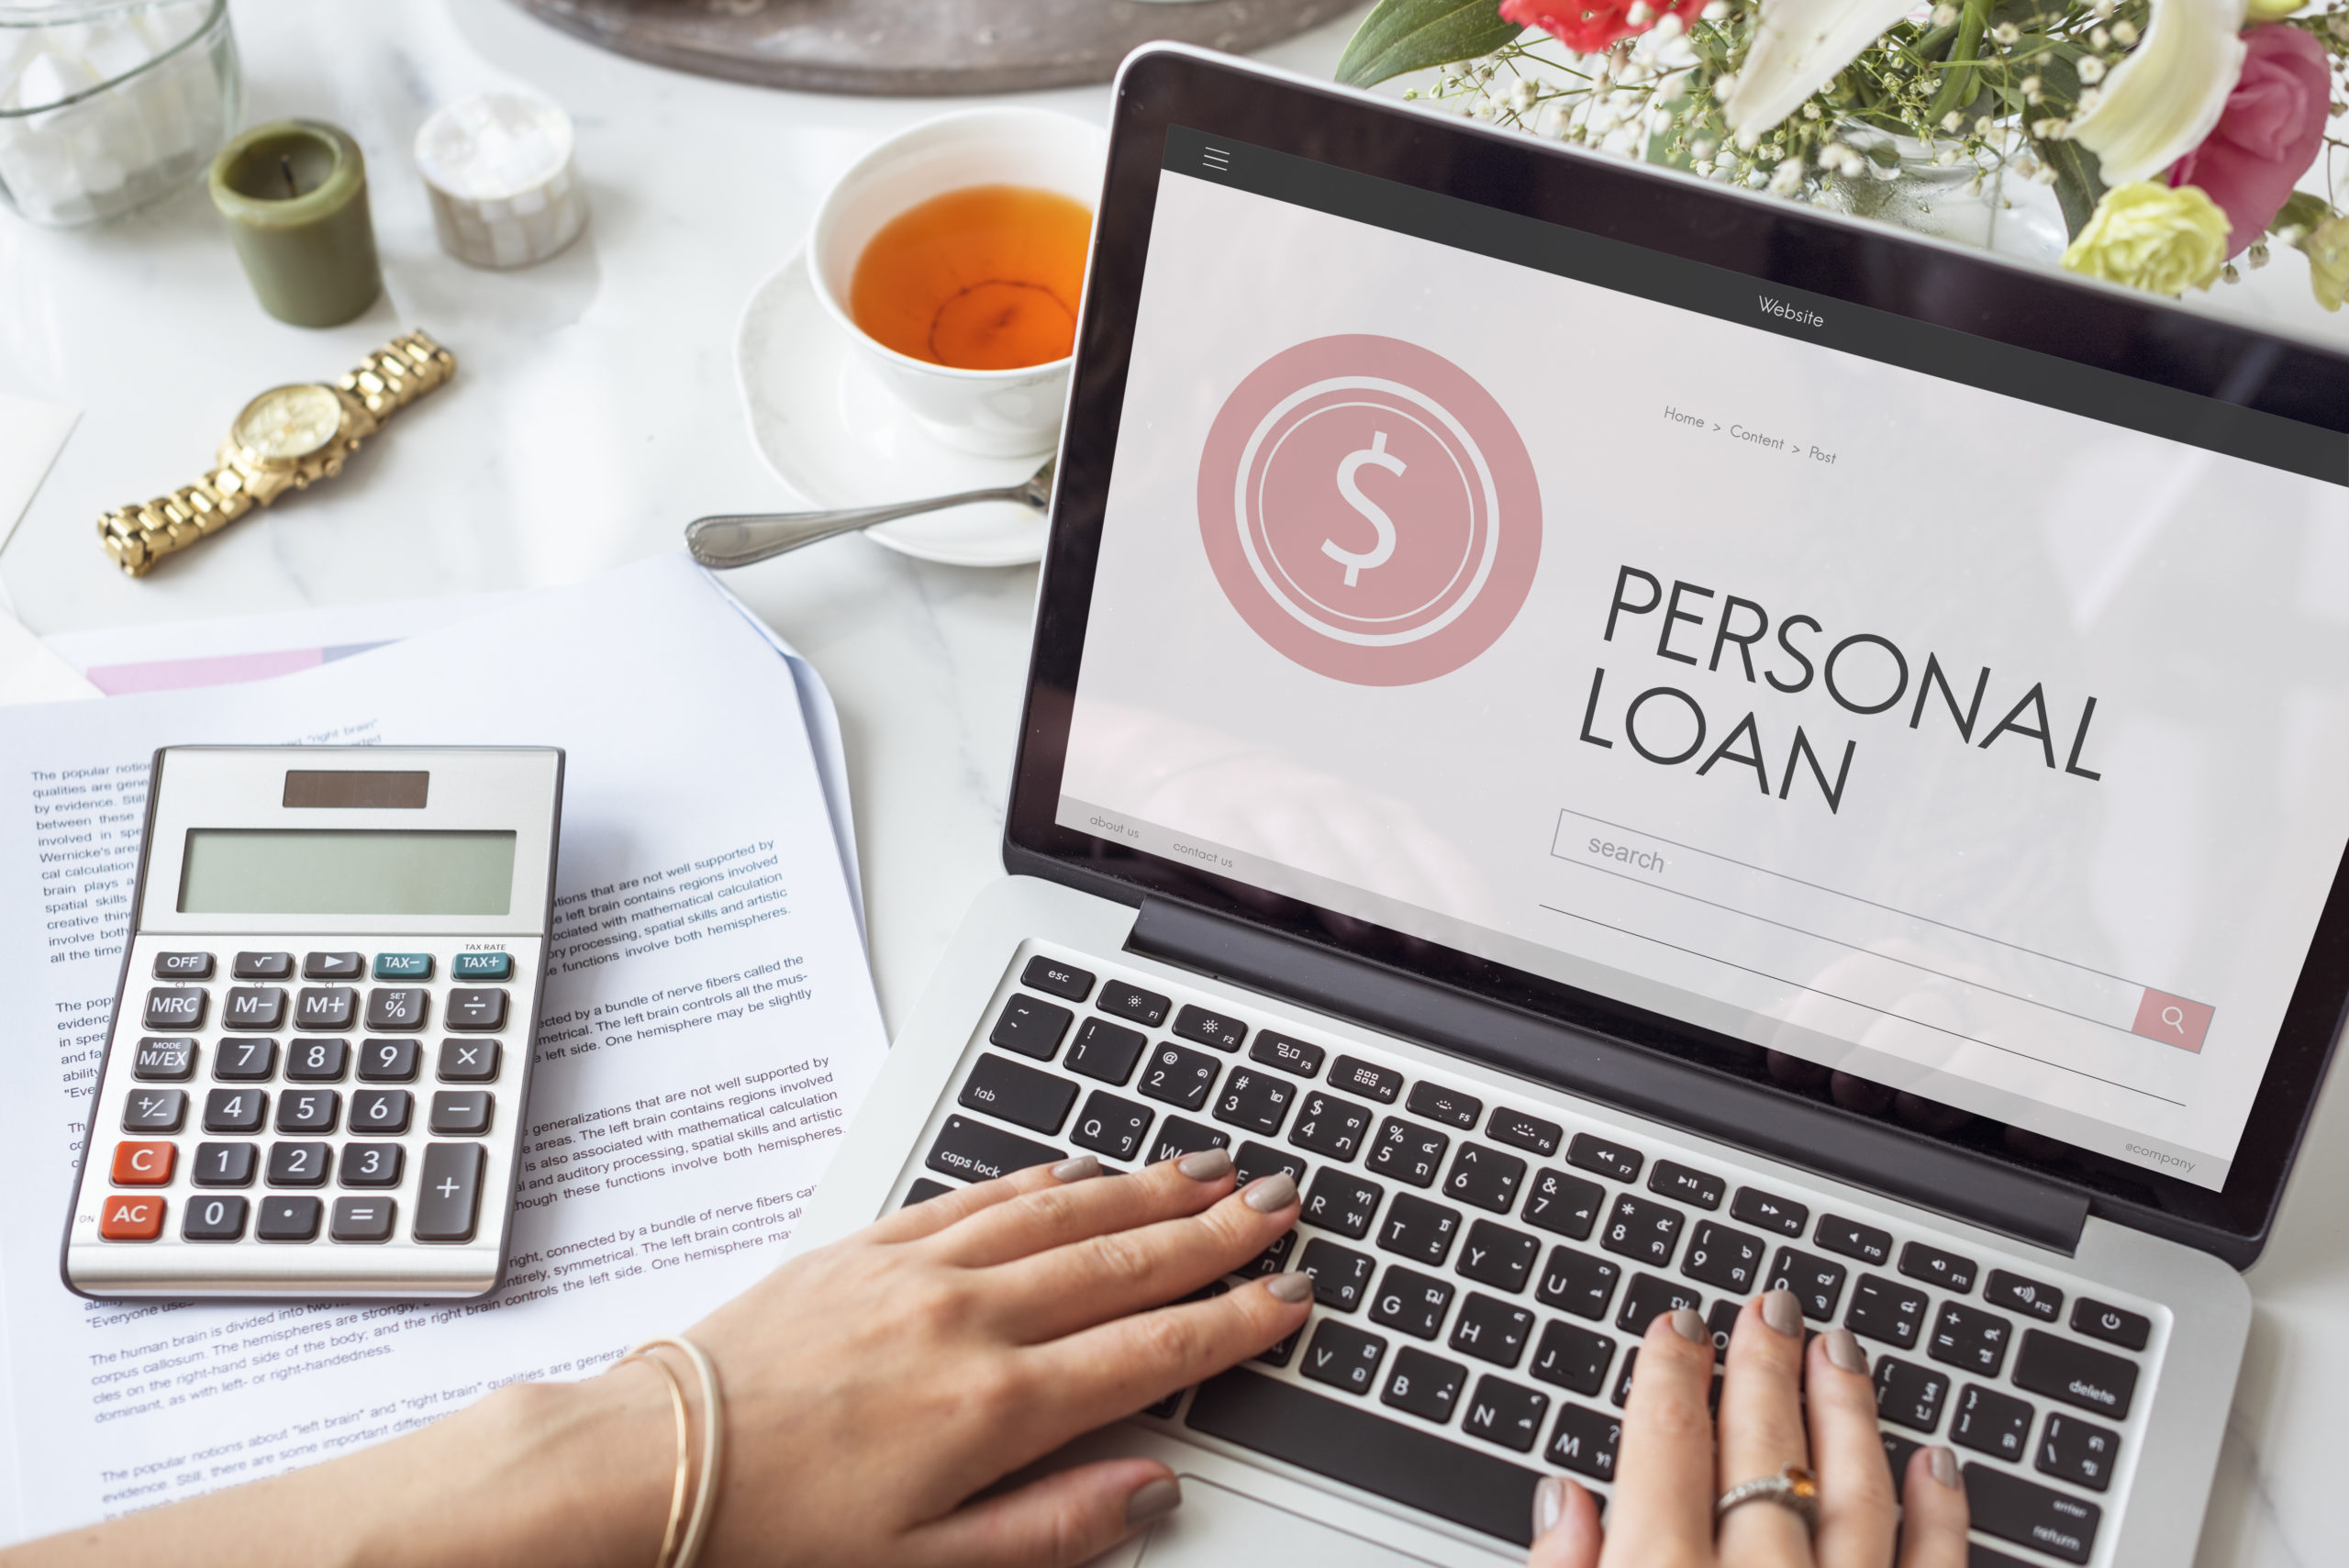 What is small personal loan and how to apply for it onlin